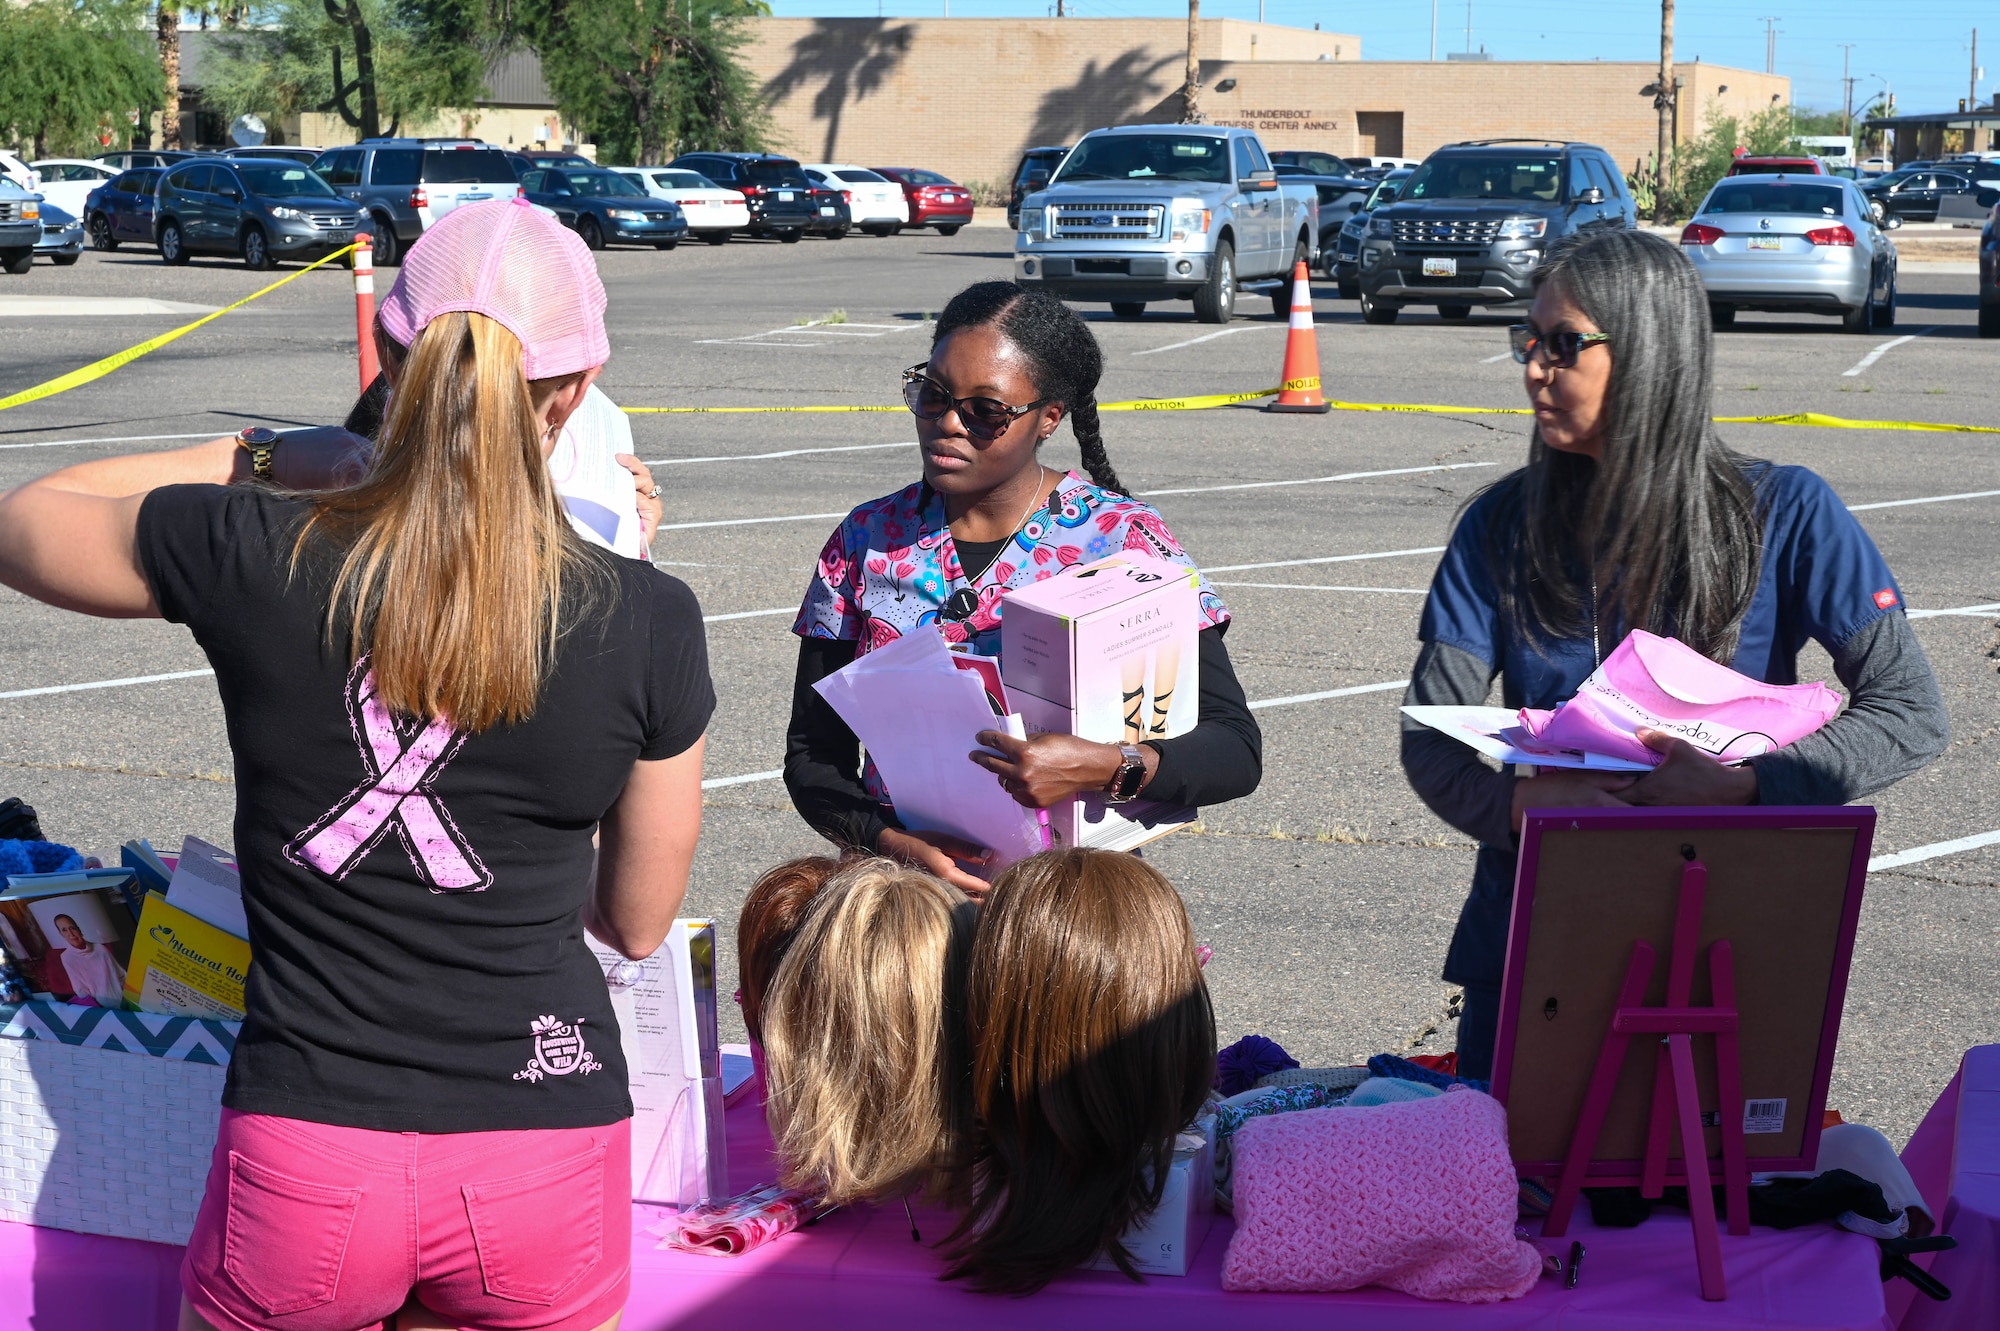 A member of Reba’s Vision showcases some of the accessories given to breast cancer patients during an awareness event Oct. 5, 2022, at Luke Air Force Base, Arizona.